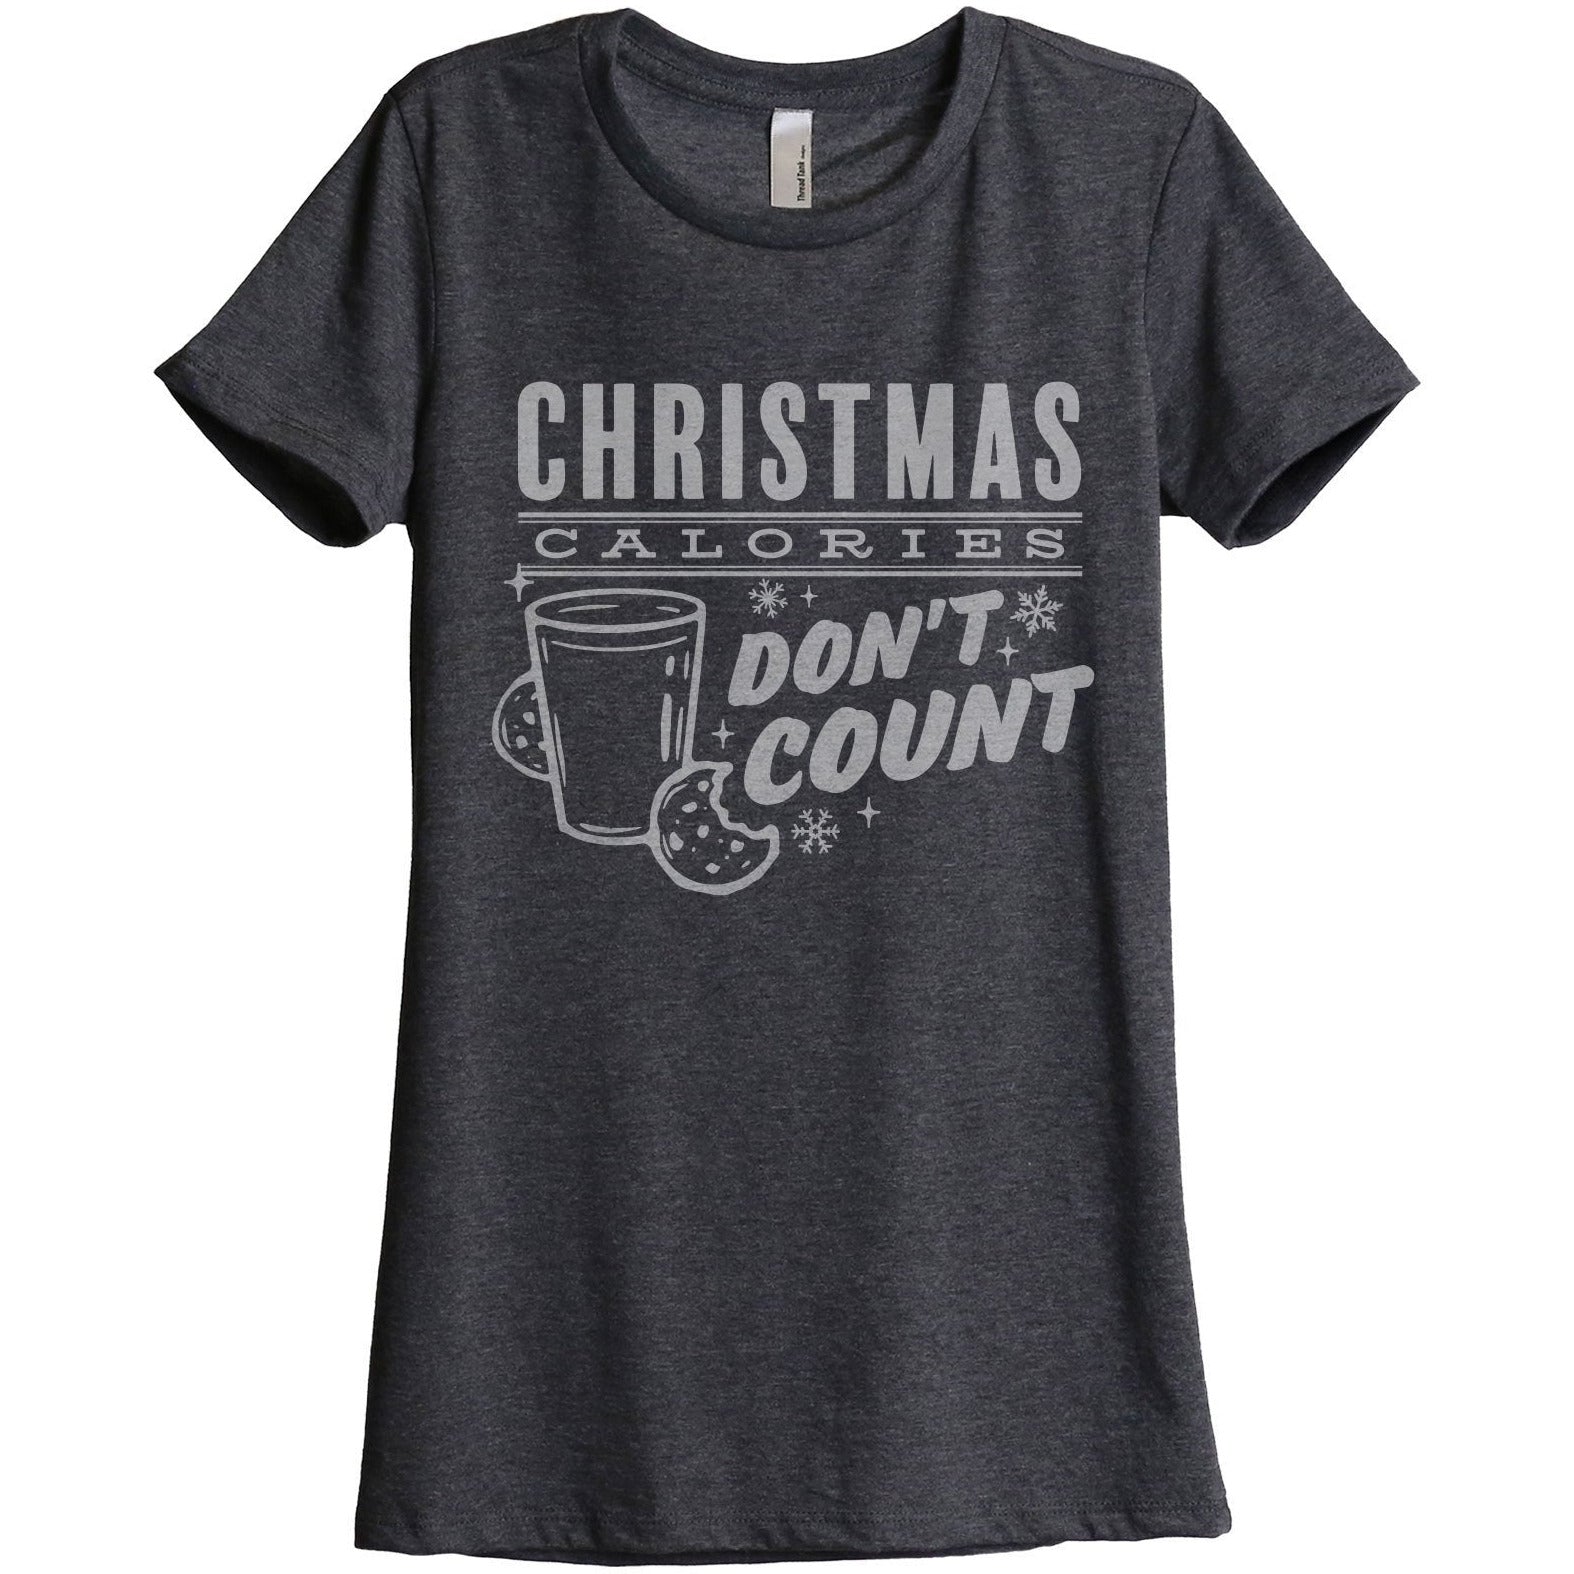 Christmas Calories Don't Count Women's Relaxed Crewneck T-Shirt Top Tee Charcoal Grey
